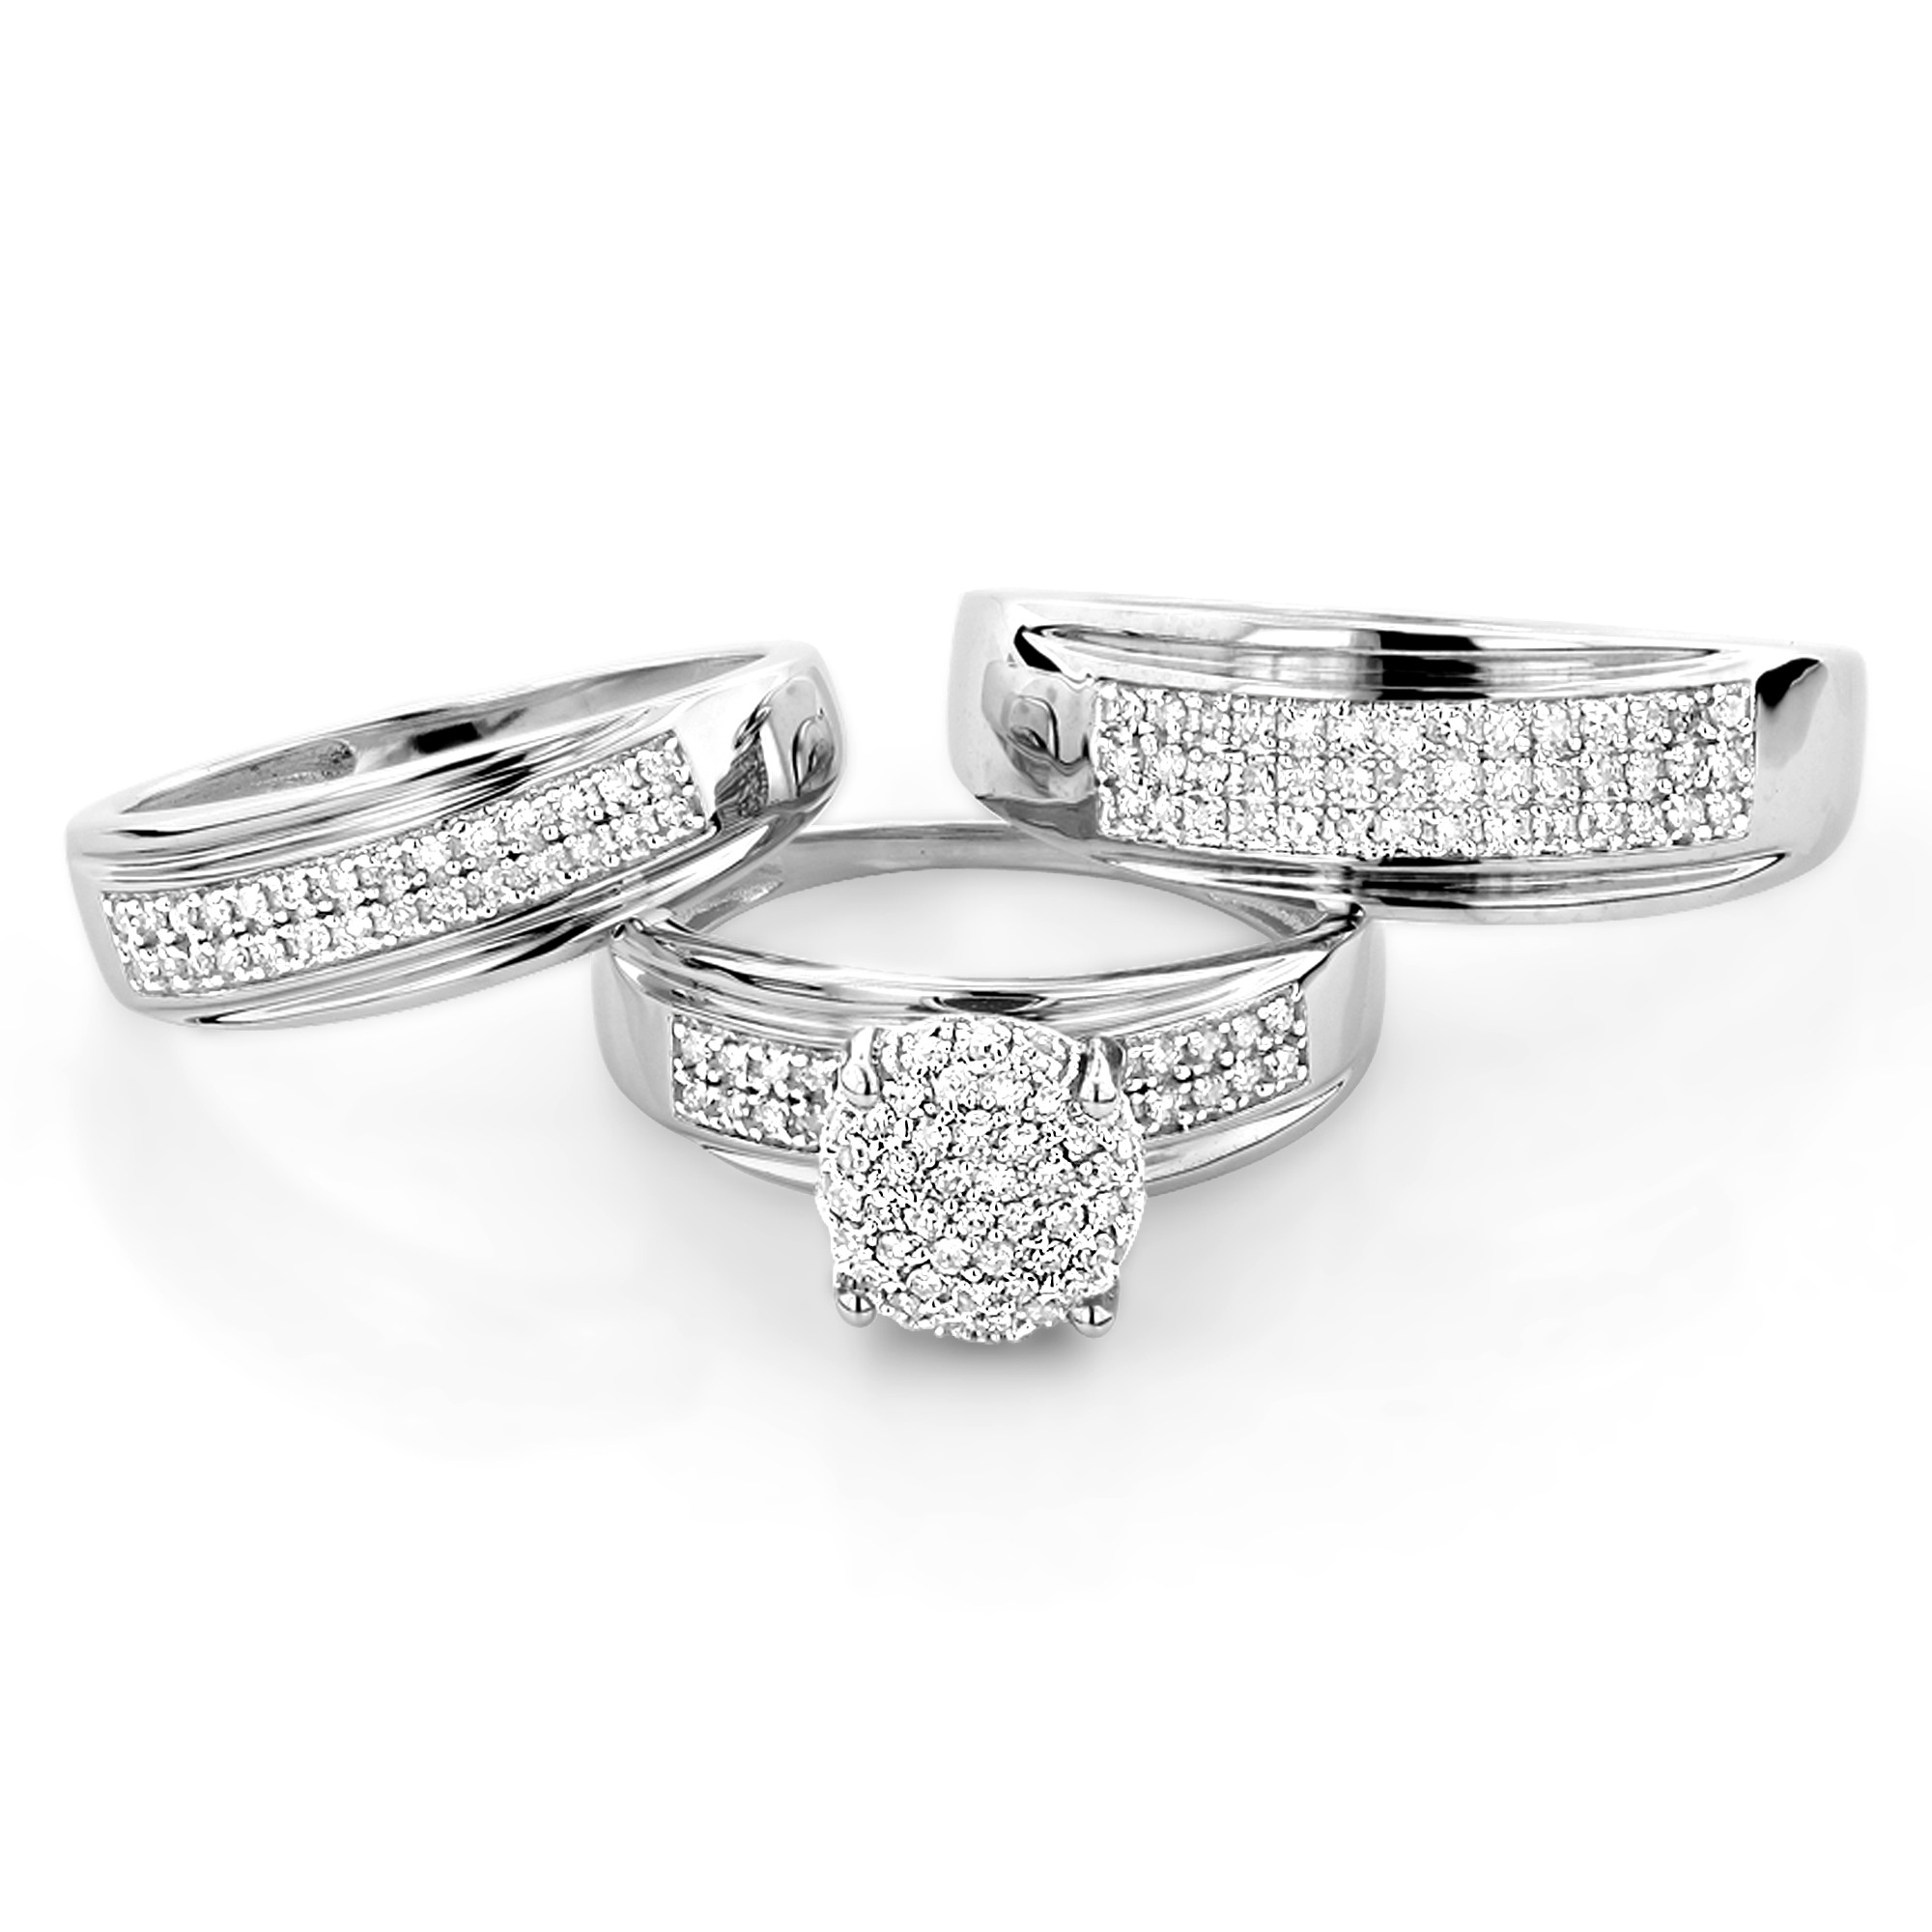 Diamond Wedding Rings For Her
 10K Gold Engagement Trio Diamond His and Hers Wedding Ring